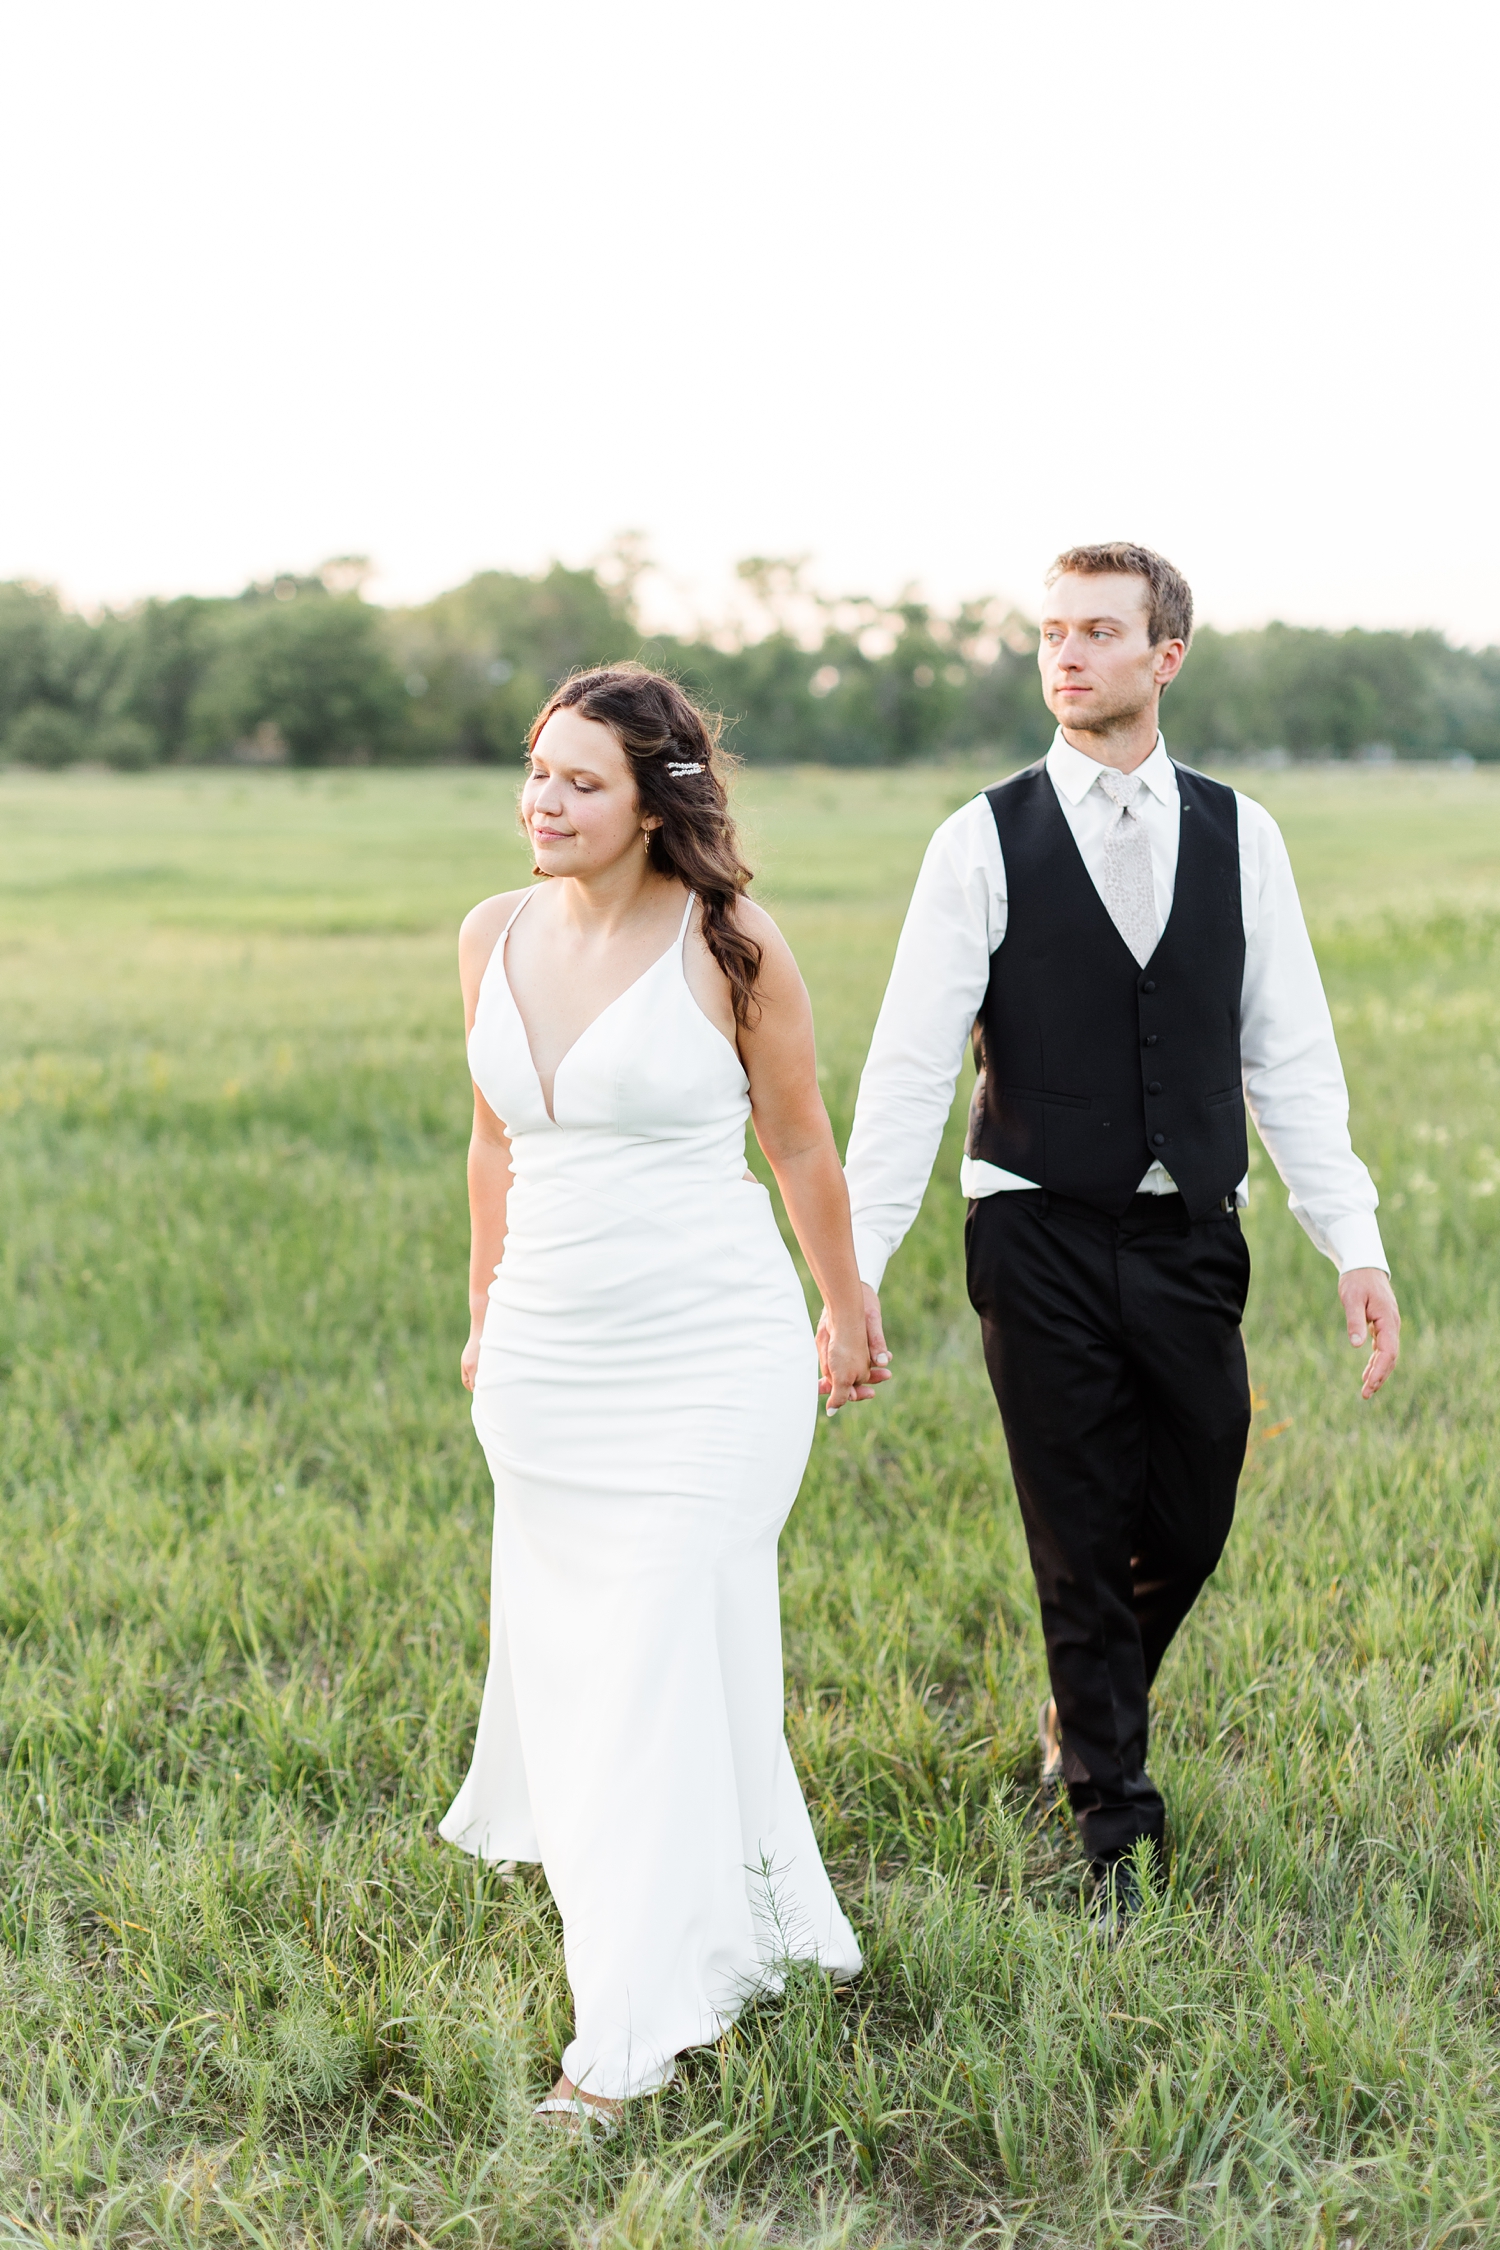 Alyssa takes her new groom's hand as they walk through a grassy field at sunset on their wedding day | CB Studio